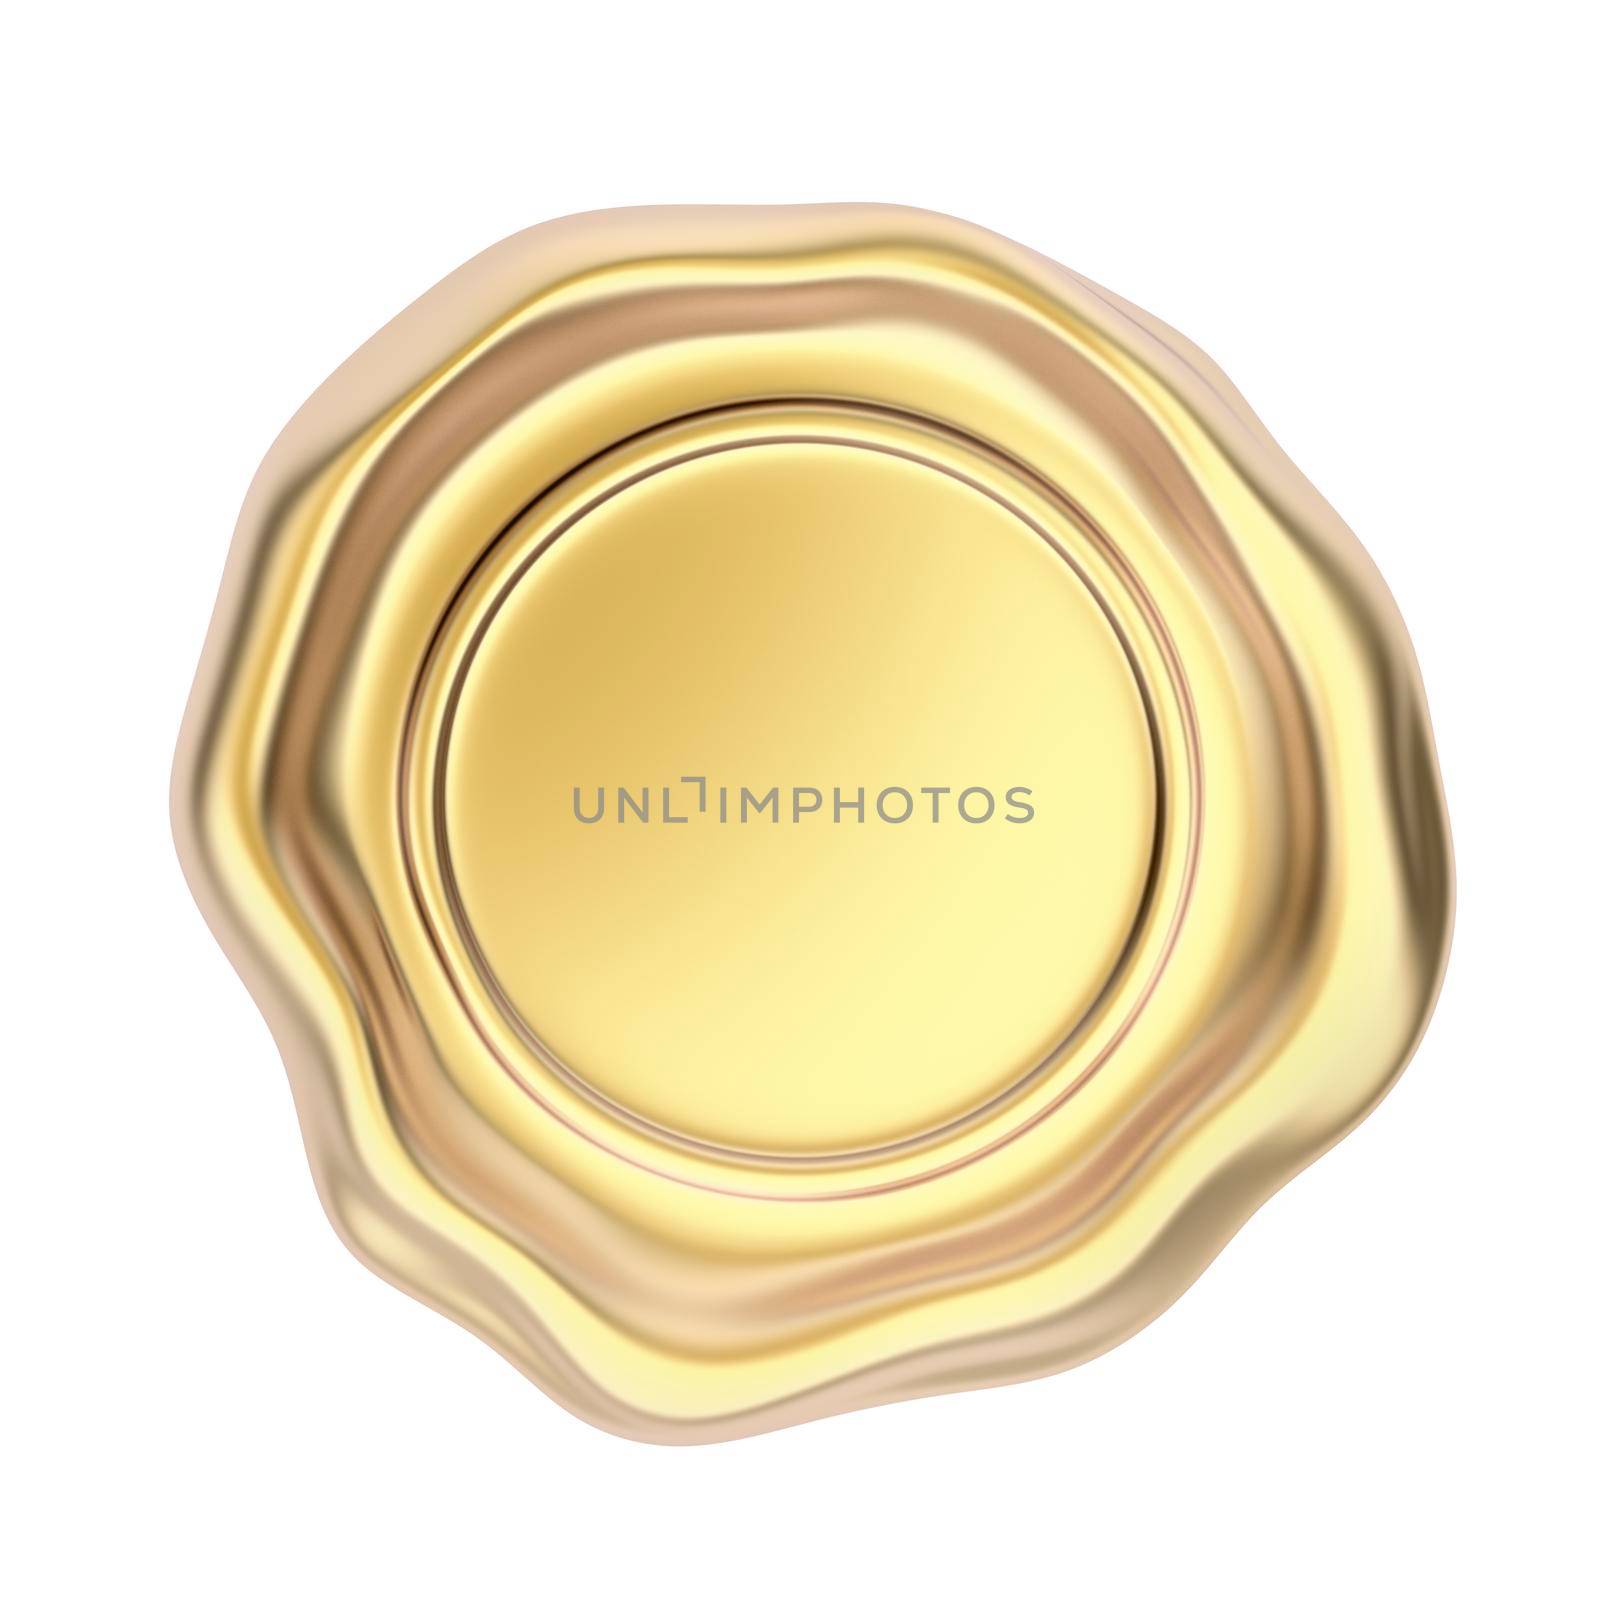 Gold colored wax seal by magraphics